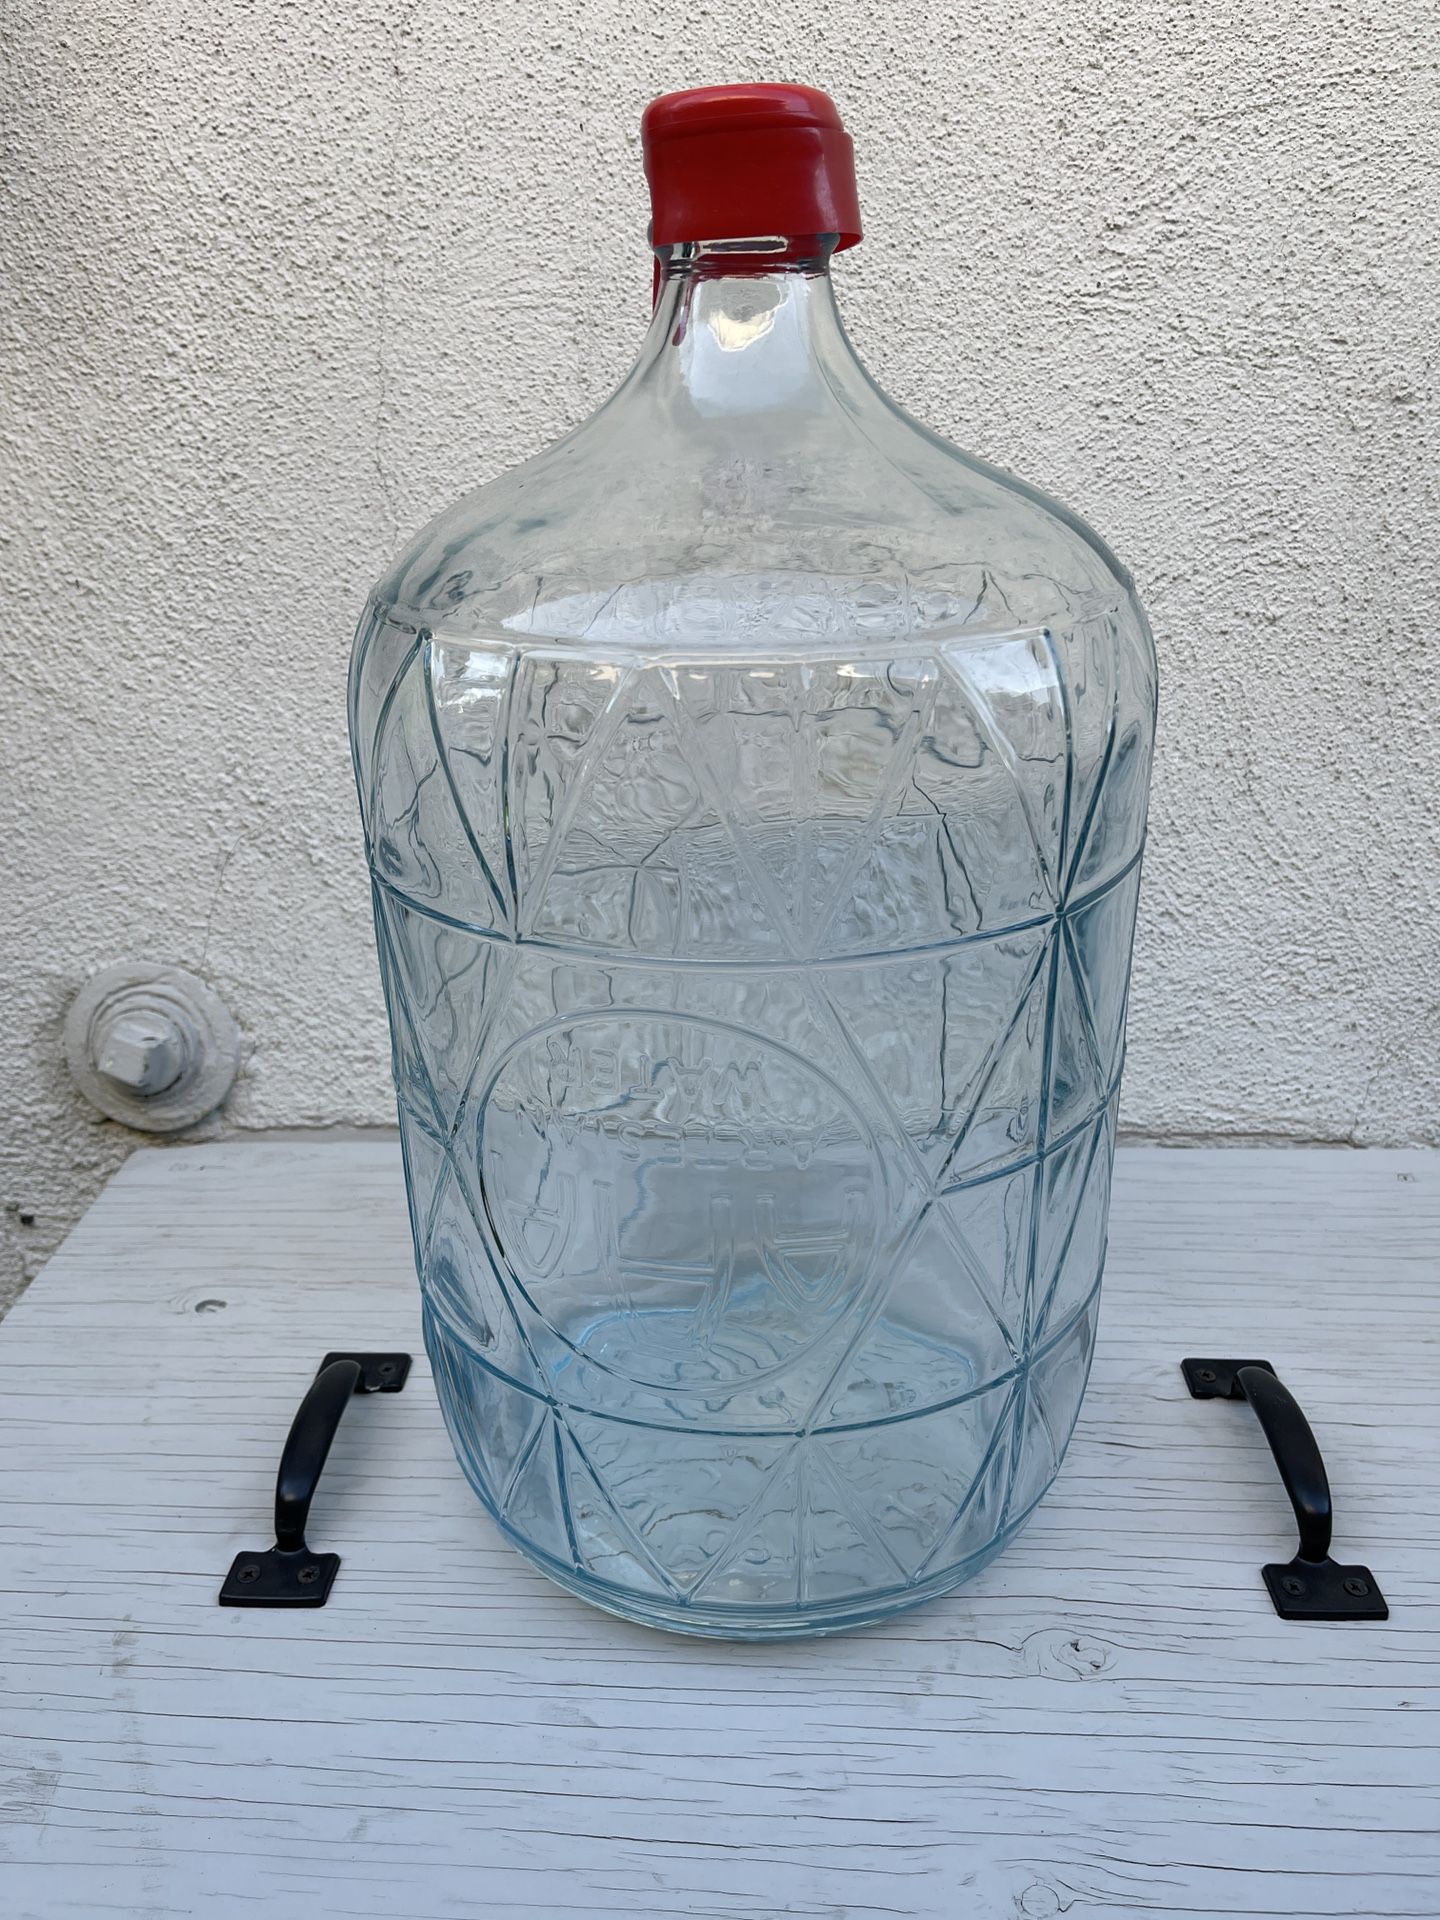 1. Vintage Beautiful Glass Water Jug Bottle Carboy - 5 Gallon - Crisa - Made In Mexico - Decor Pot Craft Home Brew Wine Beer